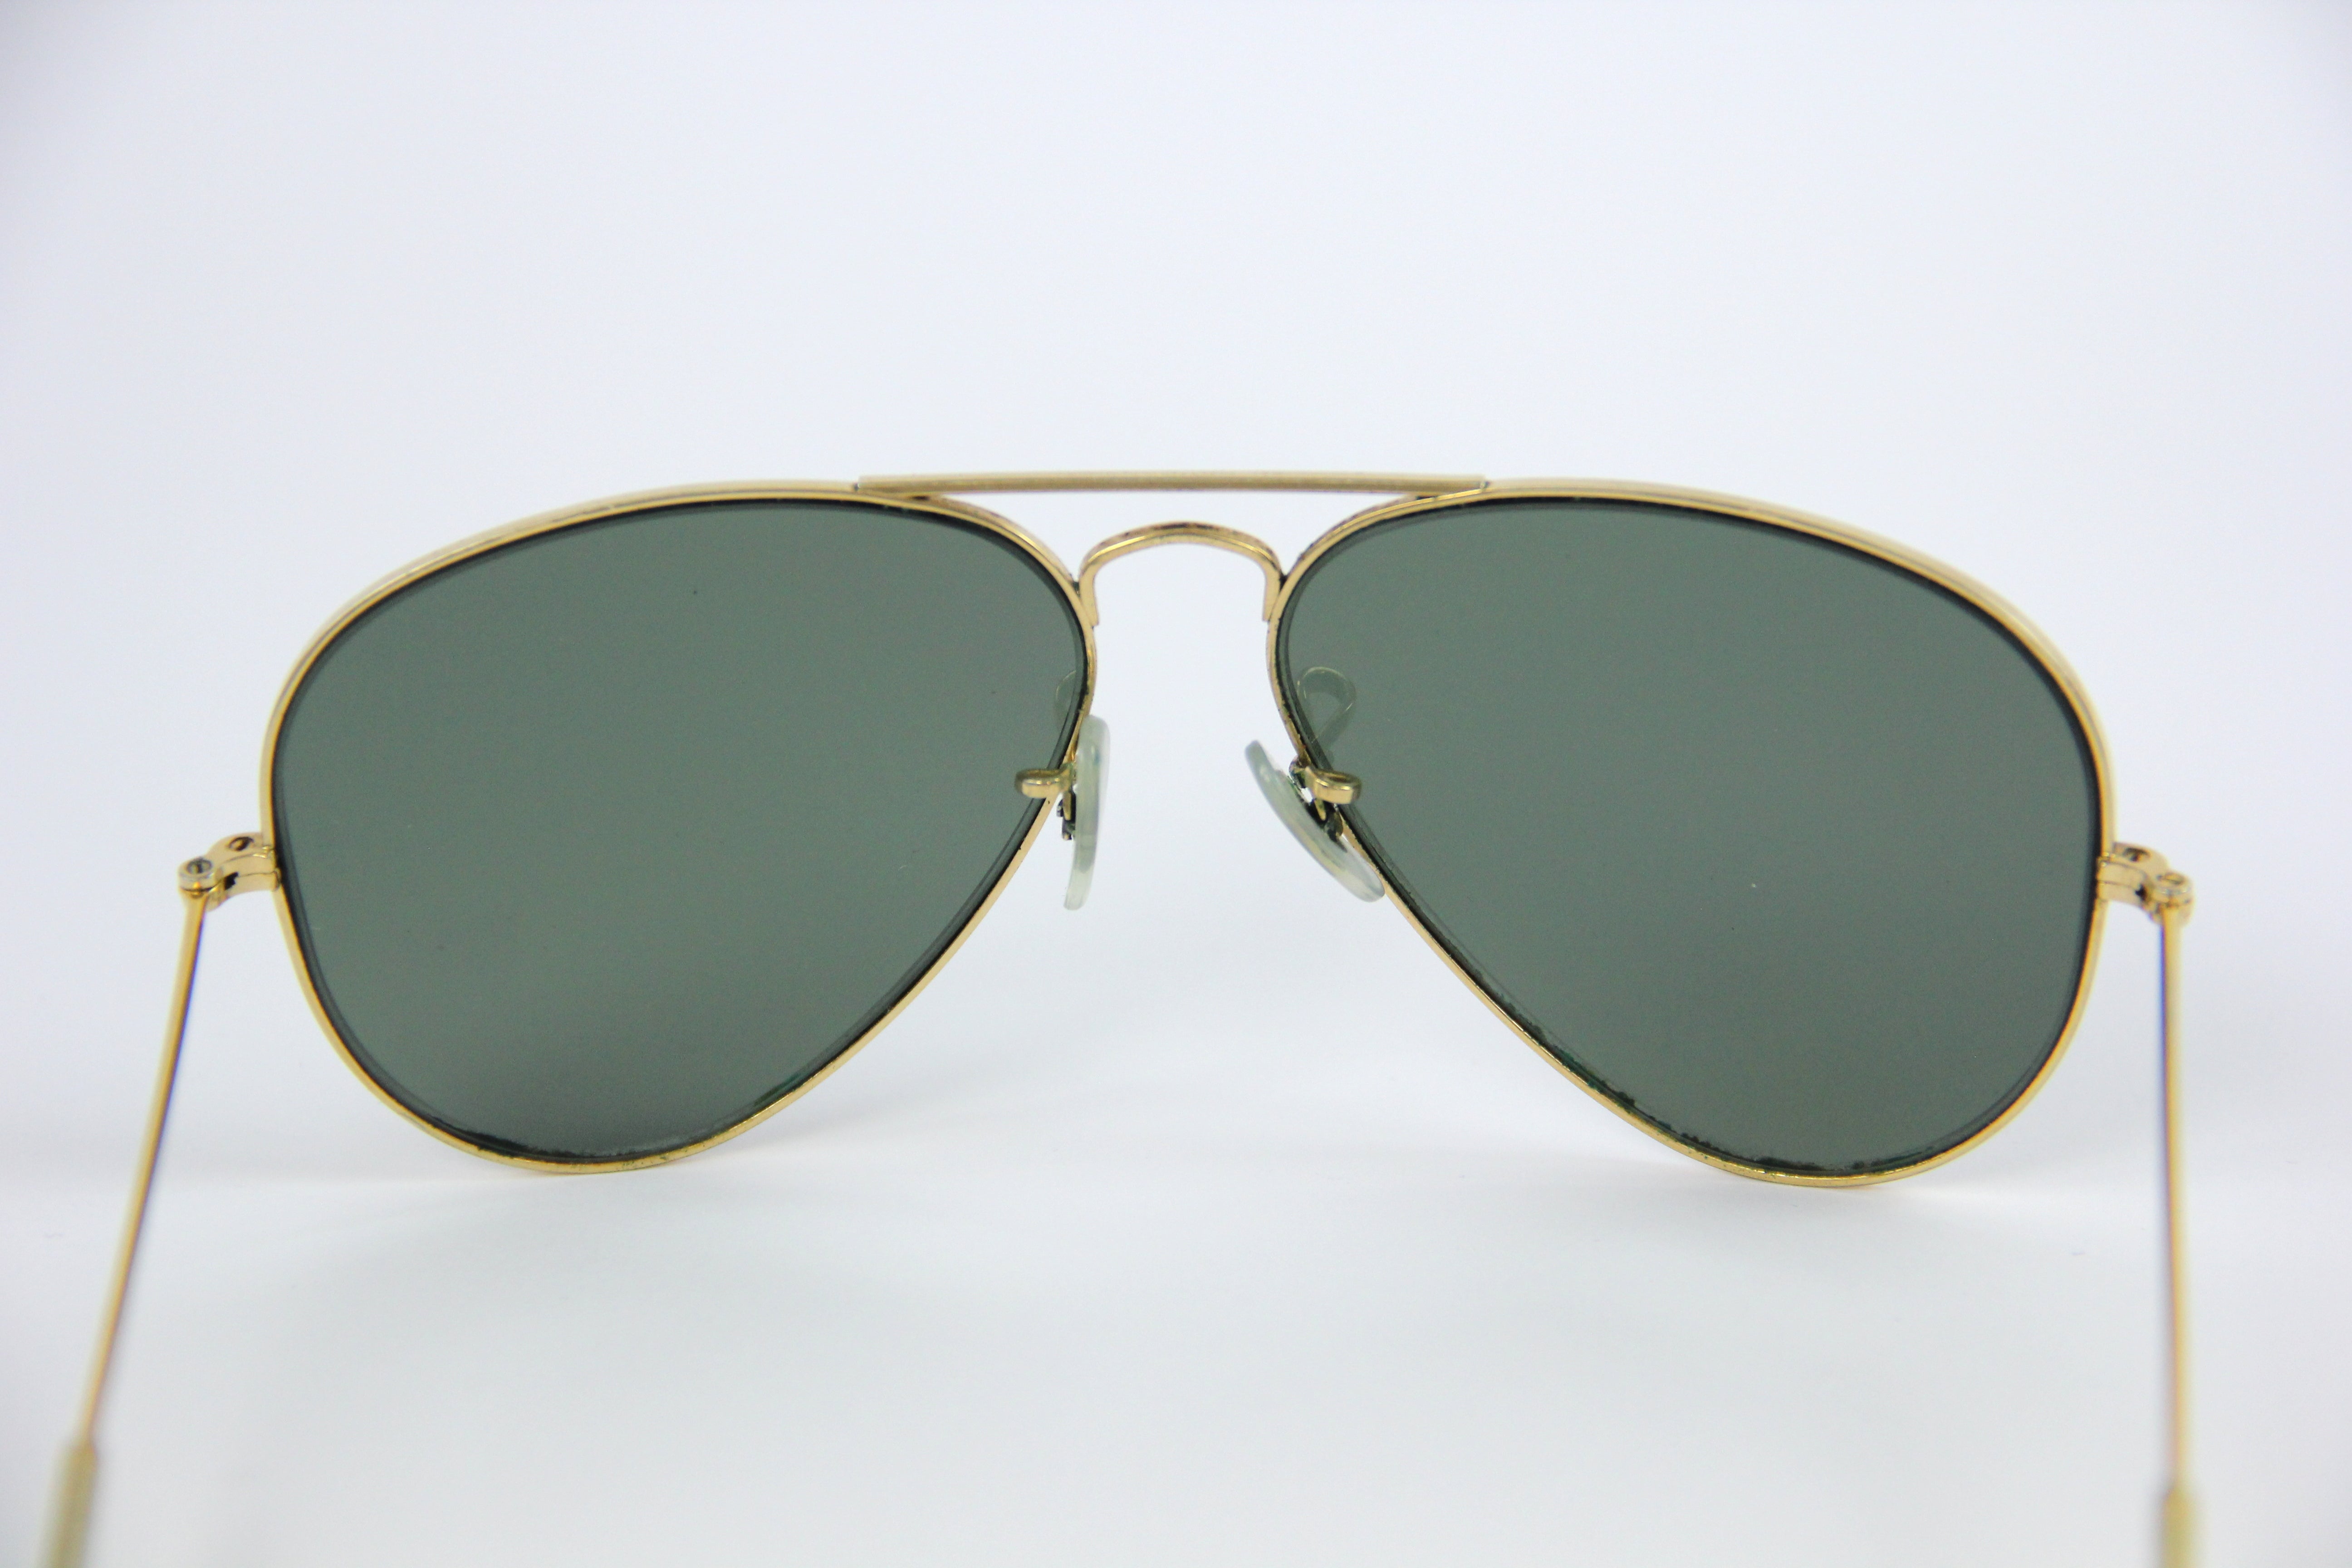 Vintage Bausch & Lomb Ray-Ban Gold Aviator Sunglasses 58-14